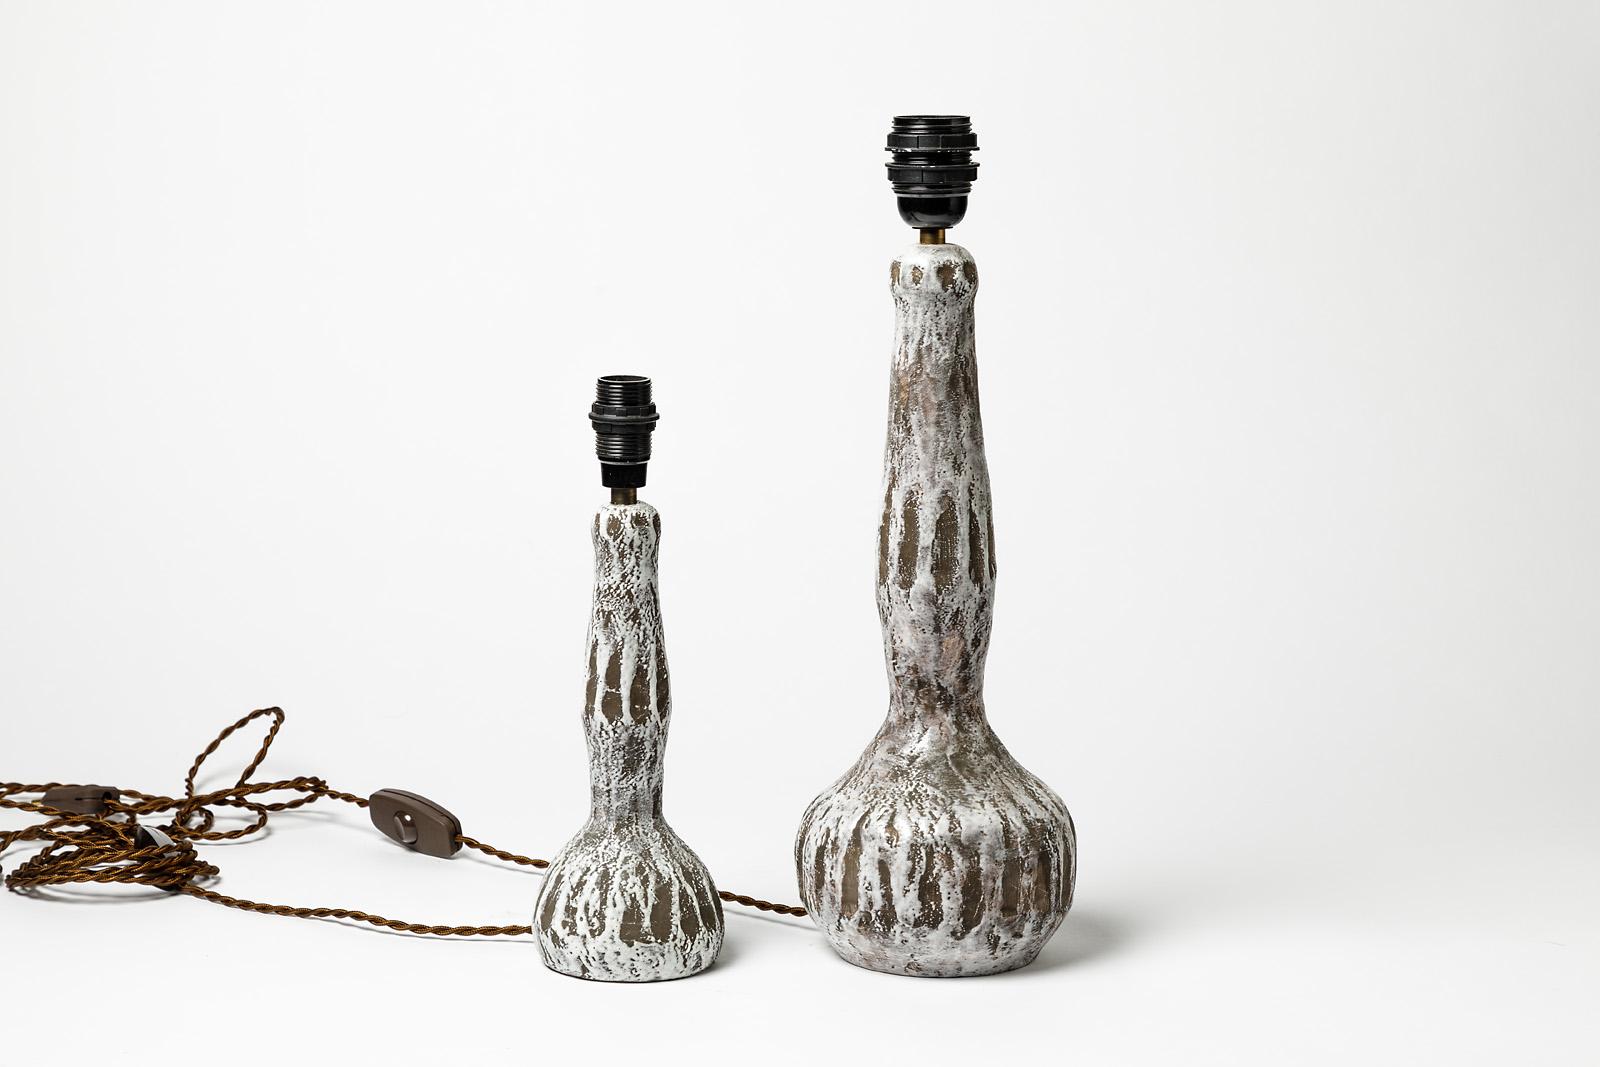 Pair of grey and white ceramic table lamps

An elegant set of two lamps designed, circa 1970s.

Excellent original conditions. New electrical system.

Ceramic dimensions of each: 36 x 15 x 15cm and 24 x 10 x 10cm
With electrical system 43 x